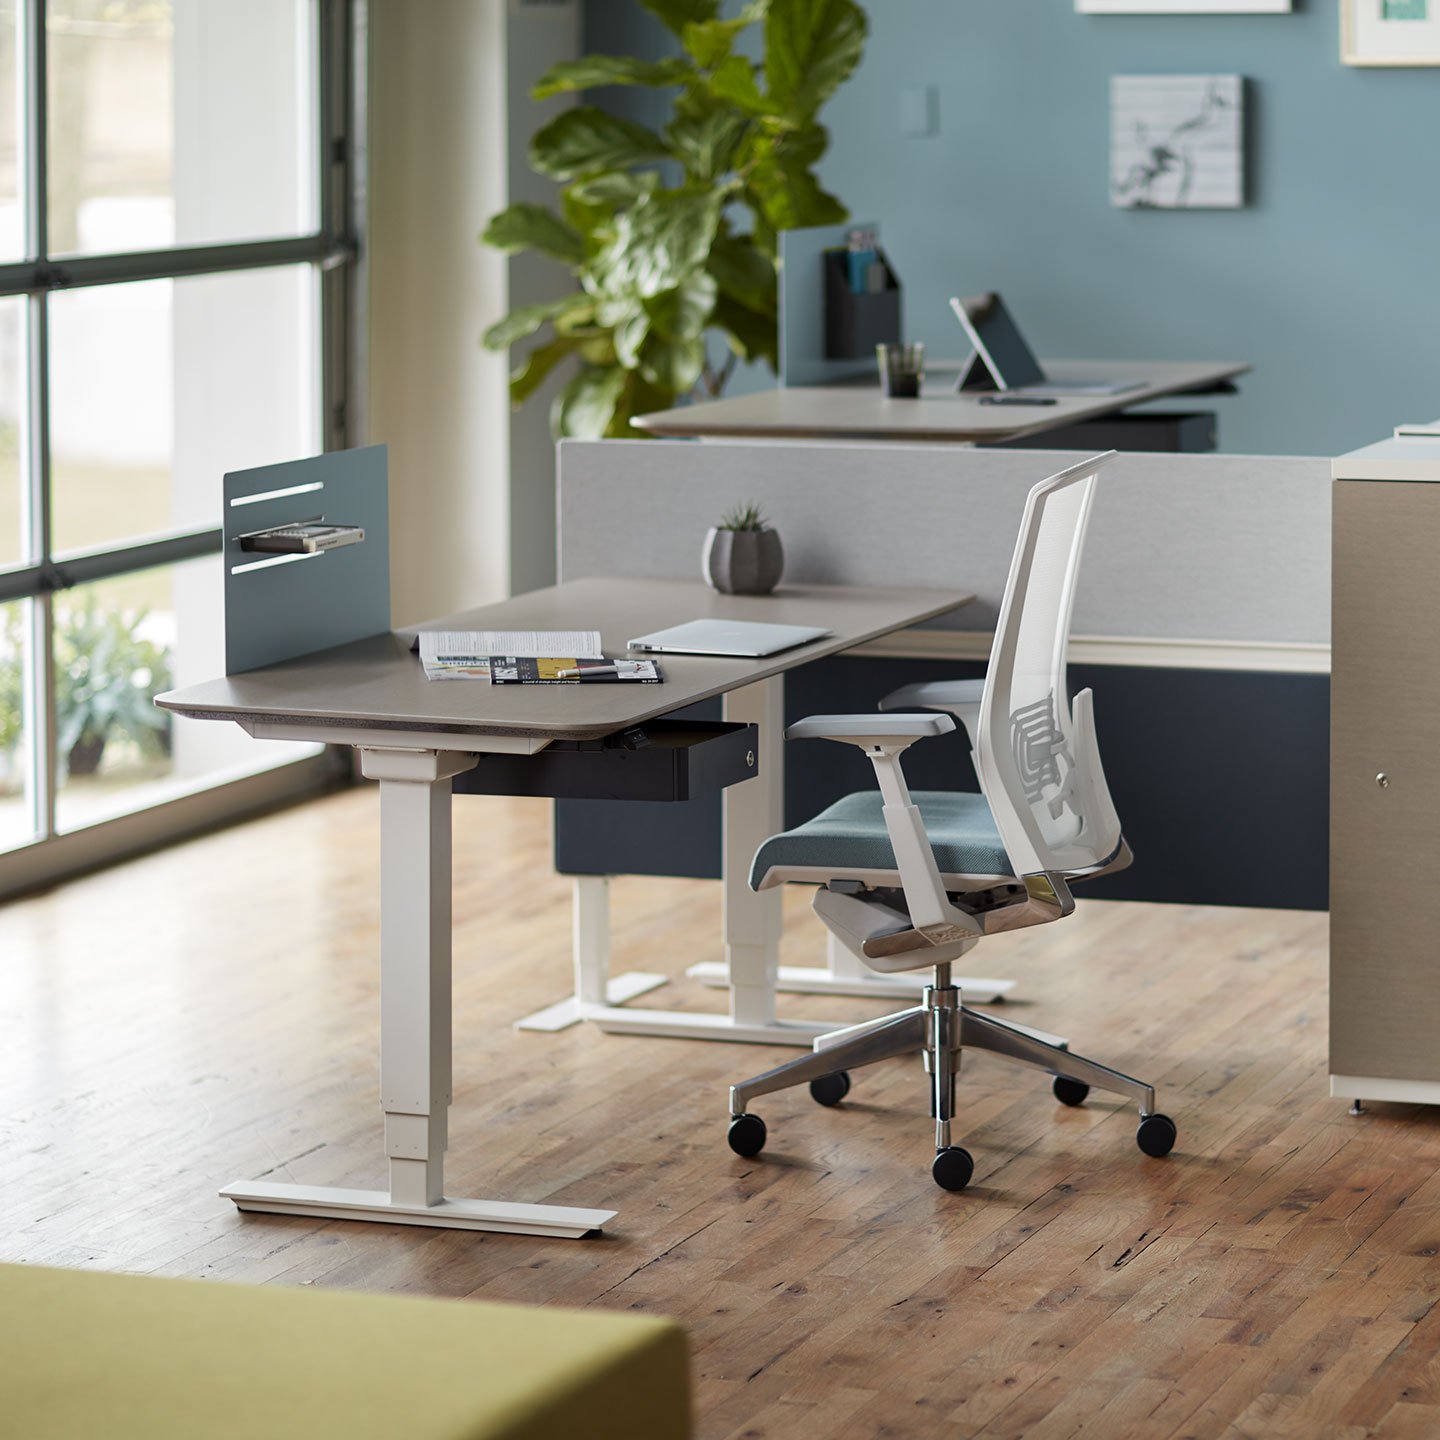 Haworth Compose Connections workspace divider in grey in an office space with height adjustable table and chair 